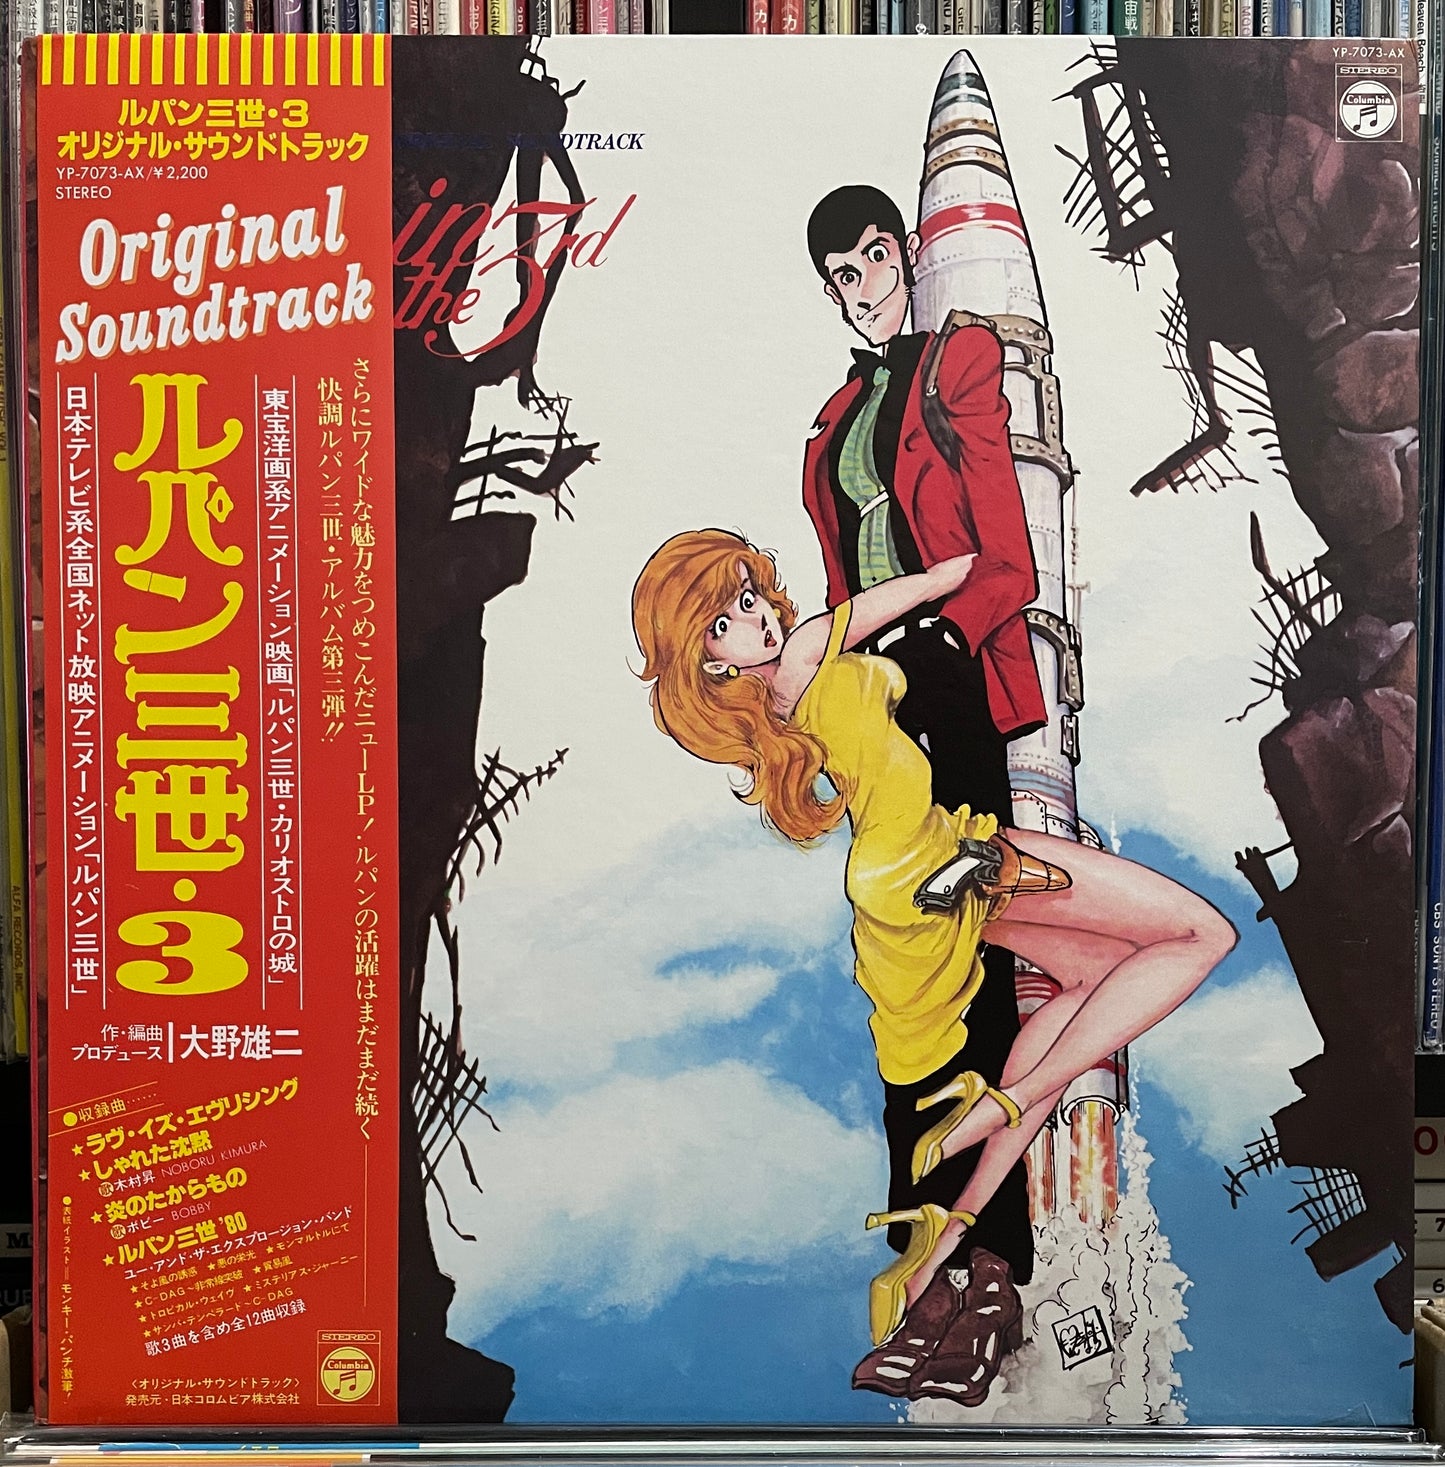 Yuji Ohno (You & The Explosion Band) “Lupin The 3rd” OST (1979)